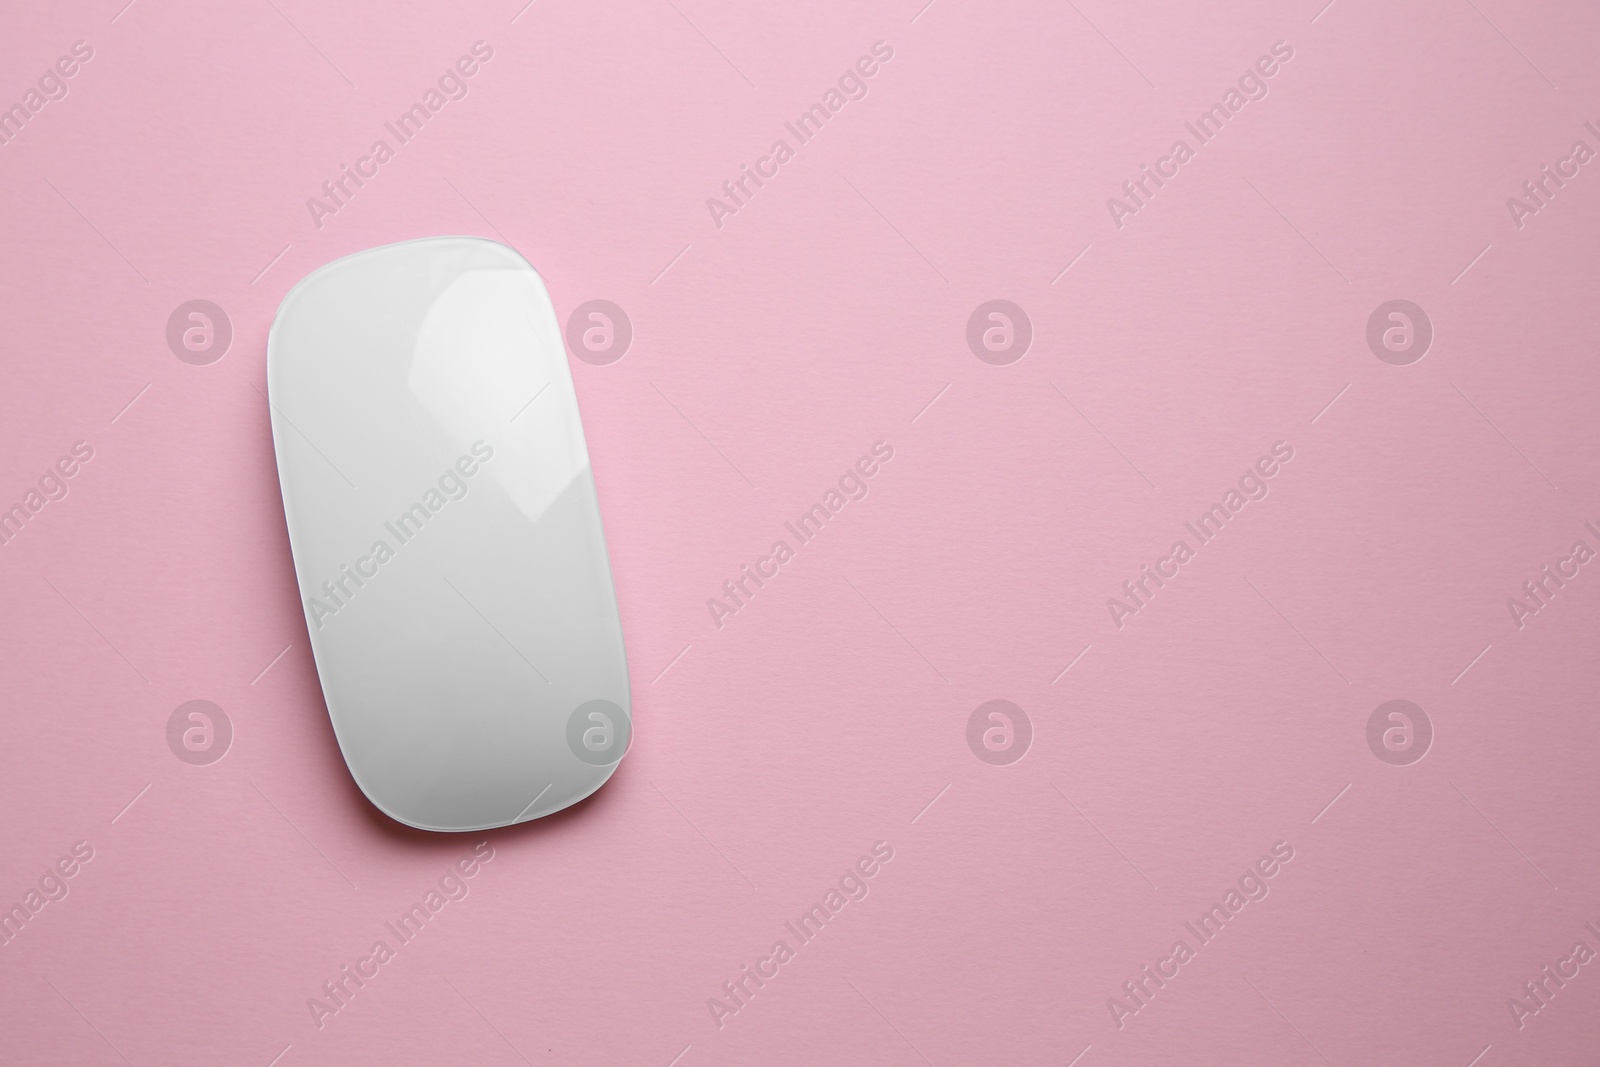 Photo of One wireless mouse on pink background, top view. Space for text